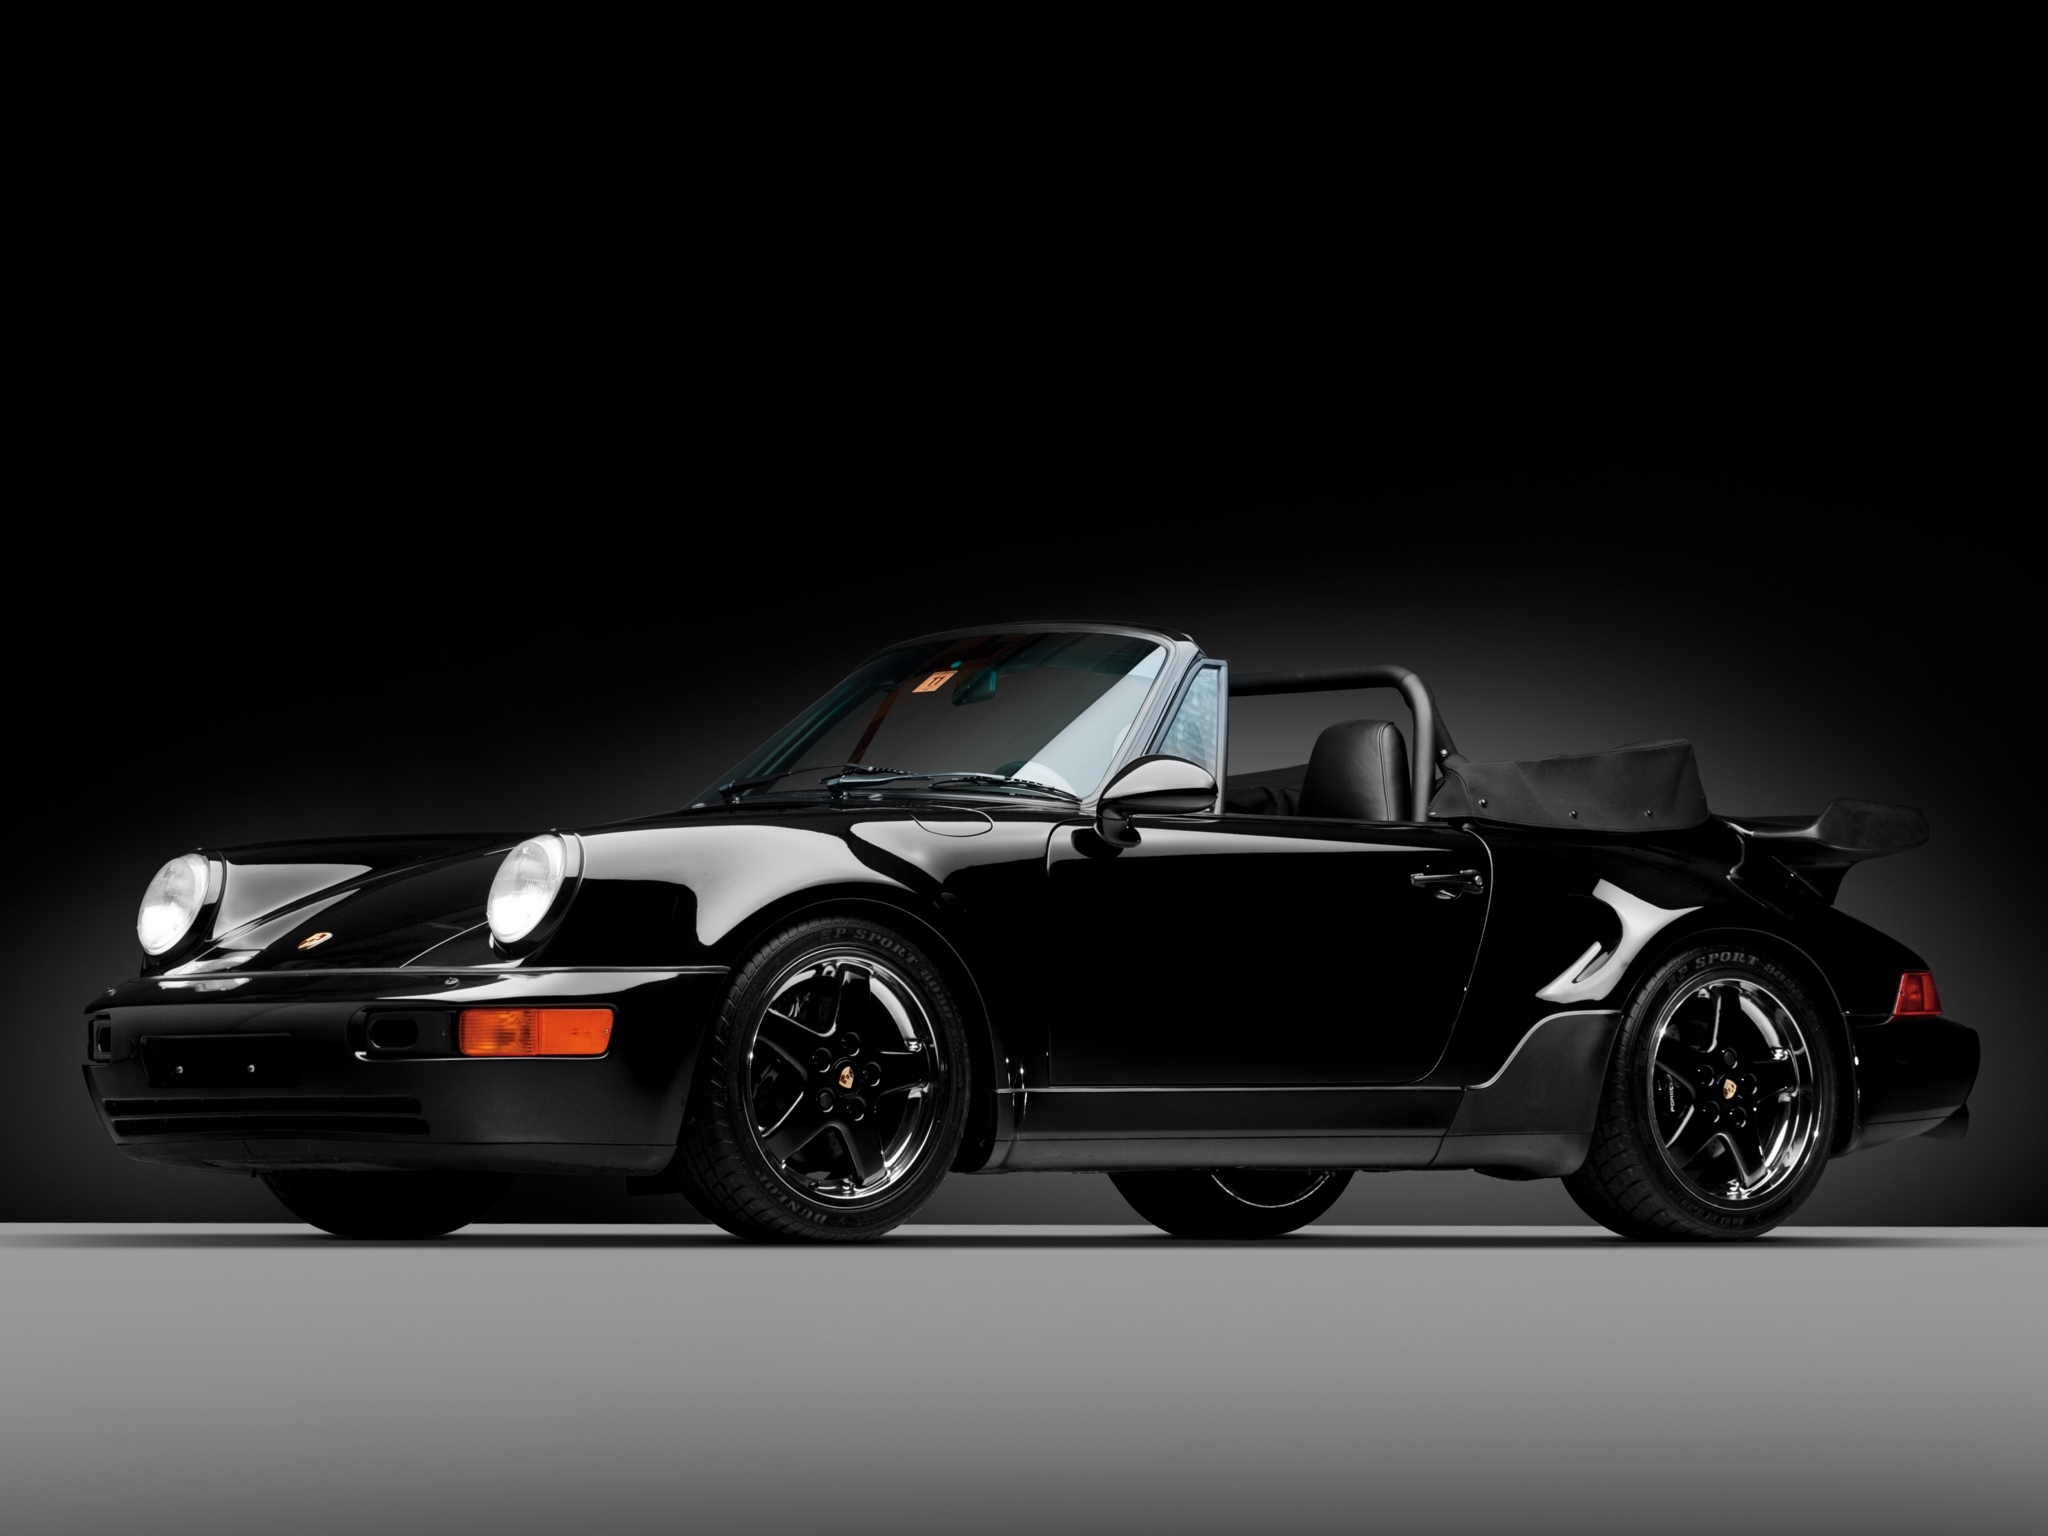 61145 Screensavers and Wallpapers Cabriolet for phone. Download porsche, cars, black, porsche 911, cabriolet, america roadster, 1992 pictures for free